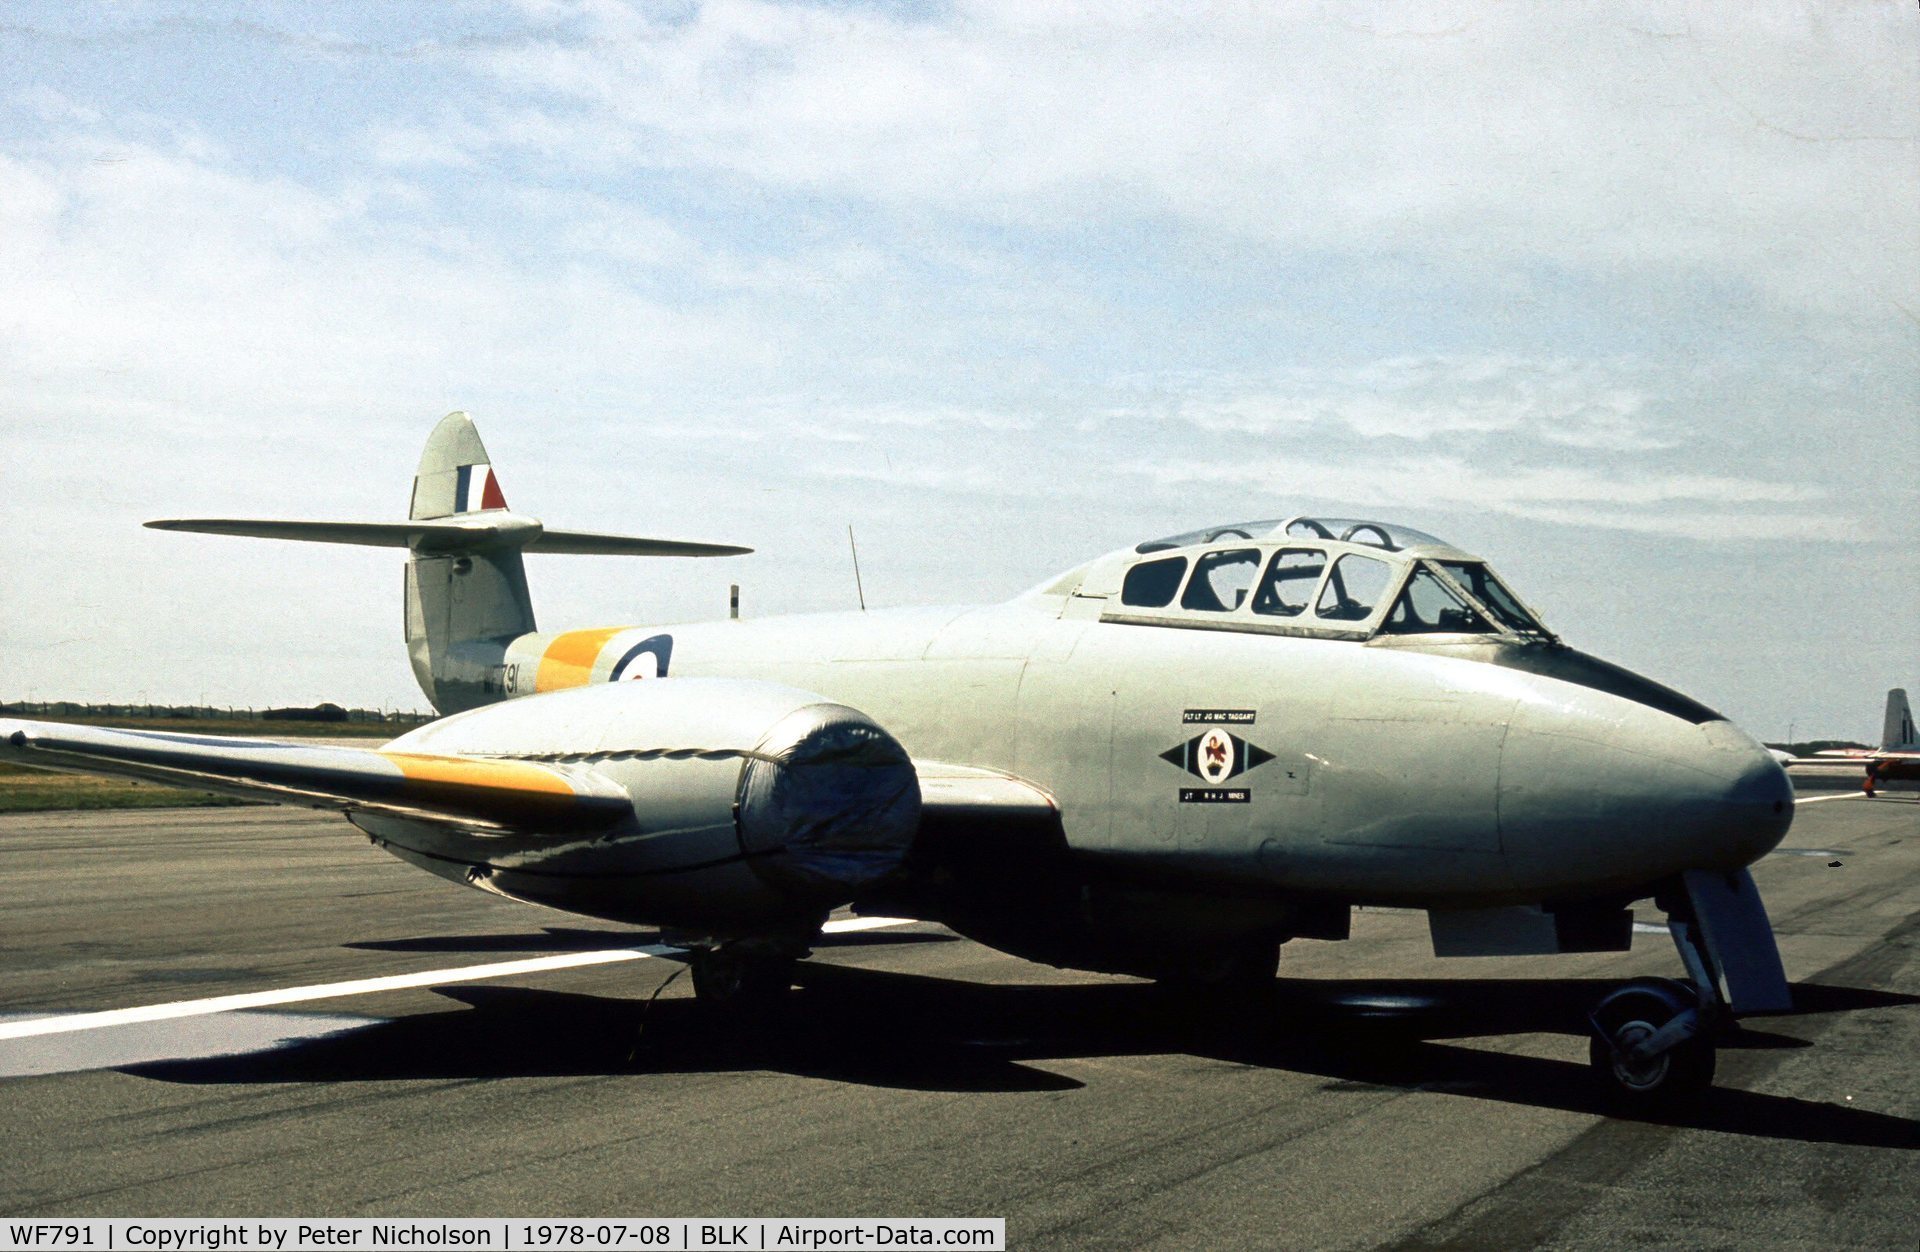 WF791, 1951 Gloster Meteor T.7 C/N 15658, Meteor T.7 of the Central Flying School displayed at the 1978 Blackpool Airshow.